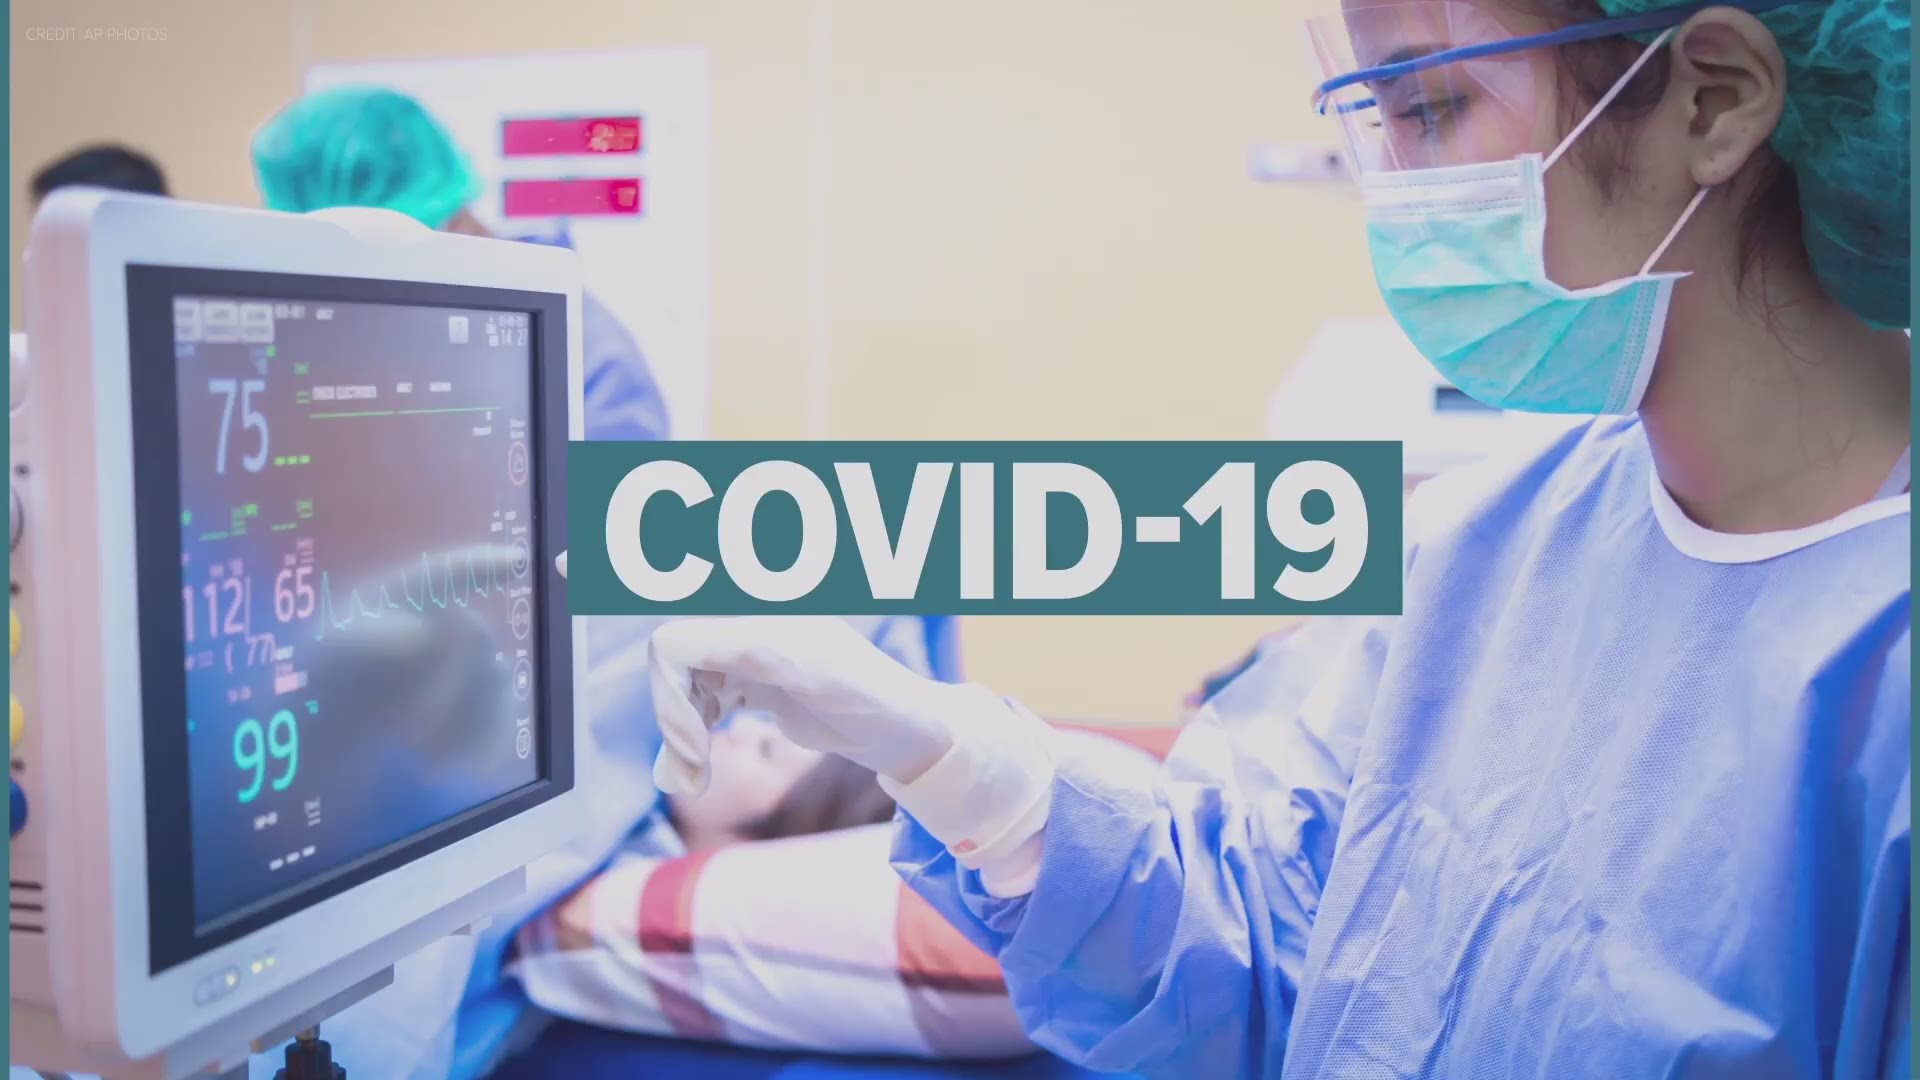 The number of coronavirus cases in Arizona has reached 14,897 as of Wednesday, with 747 coronavirus-related deaths. Here's the latest COVID-19 update.